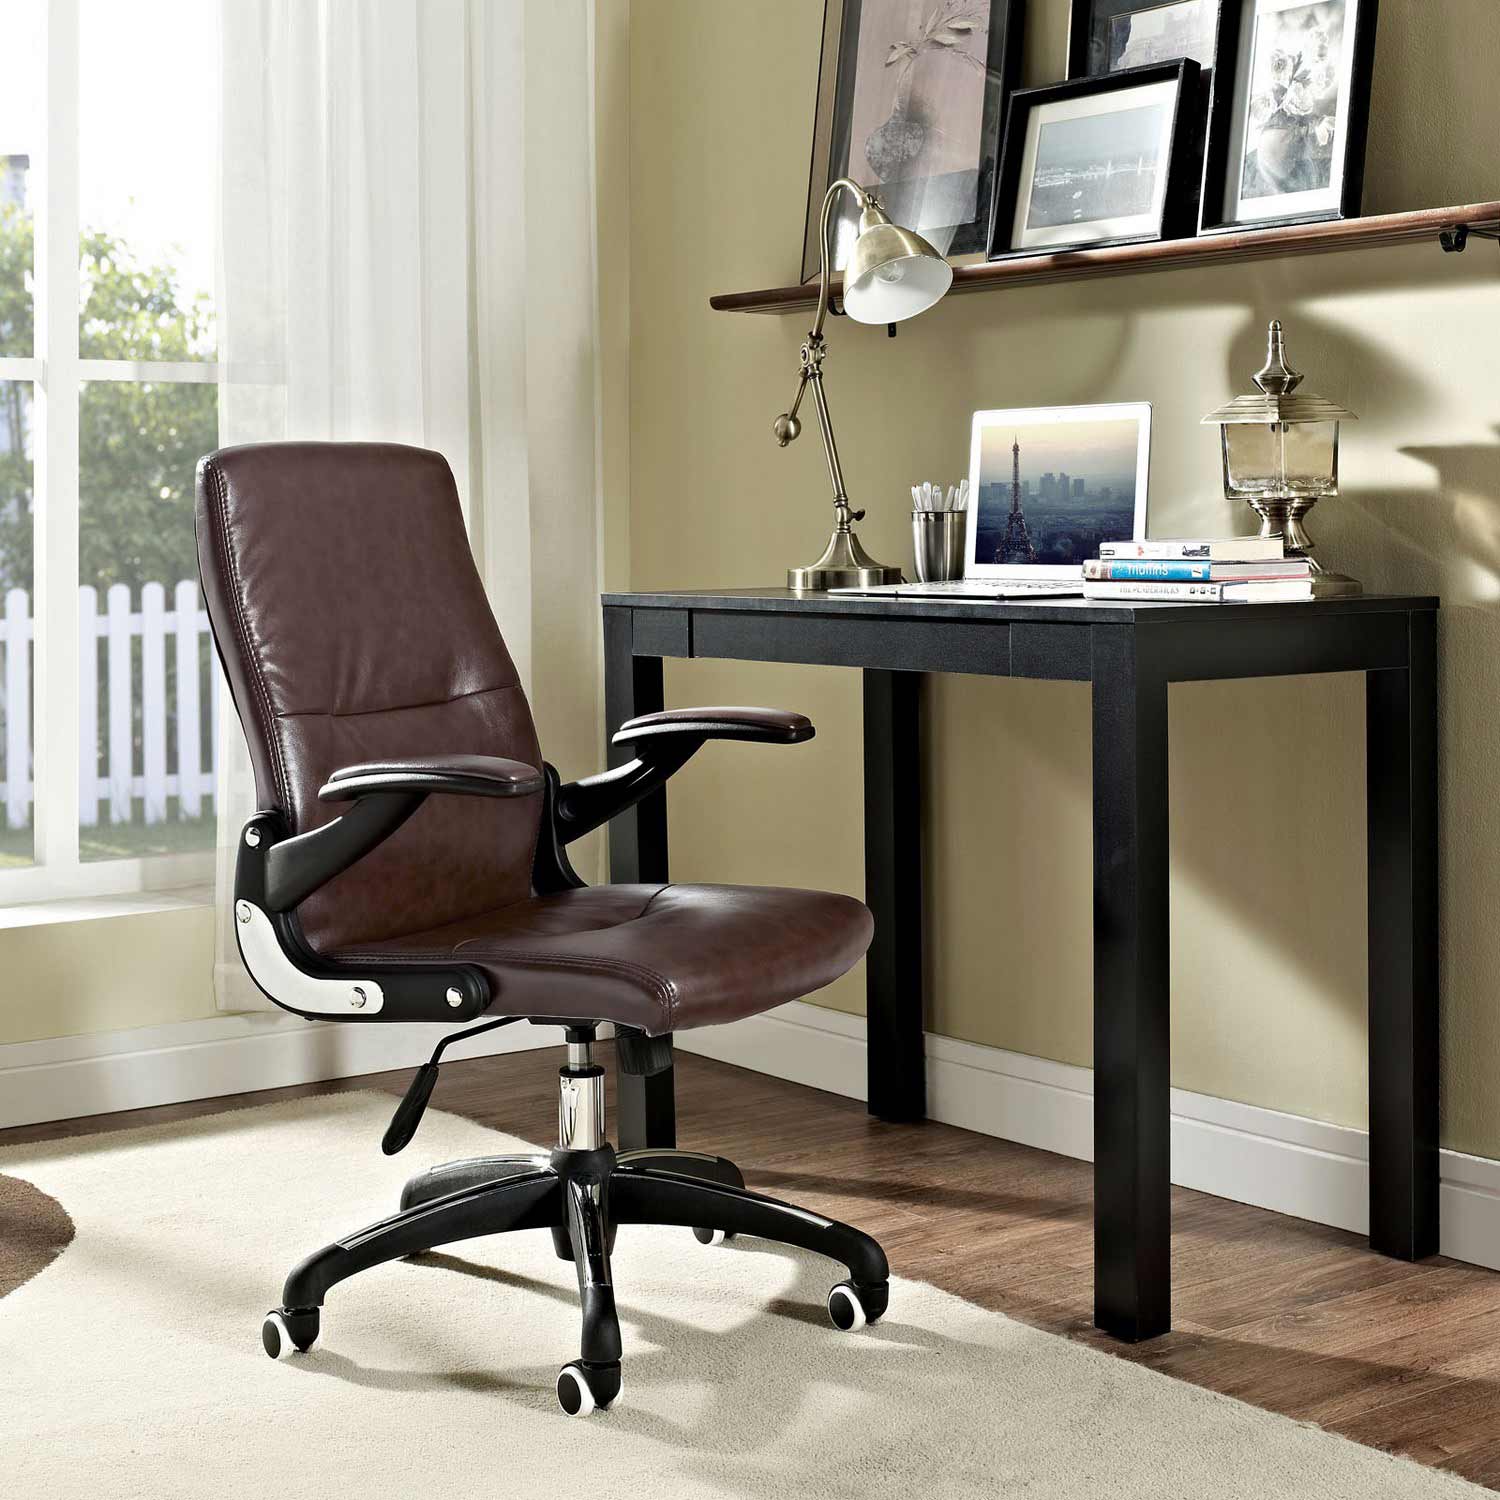 Modway Premier Highback Office Chair - Brown